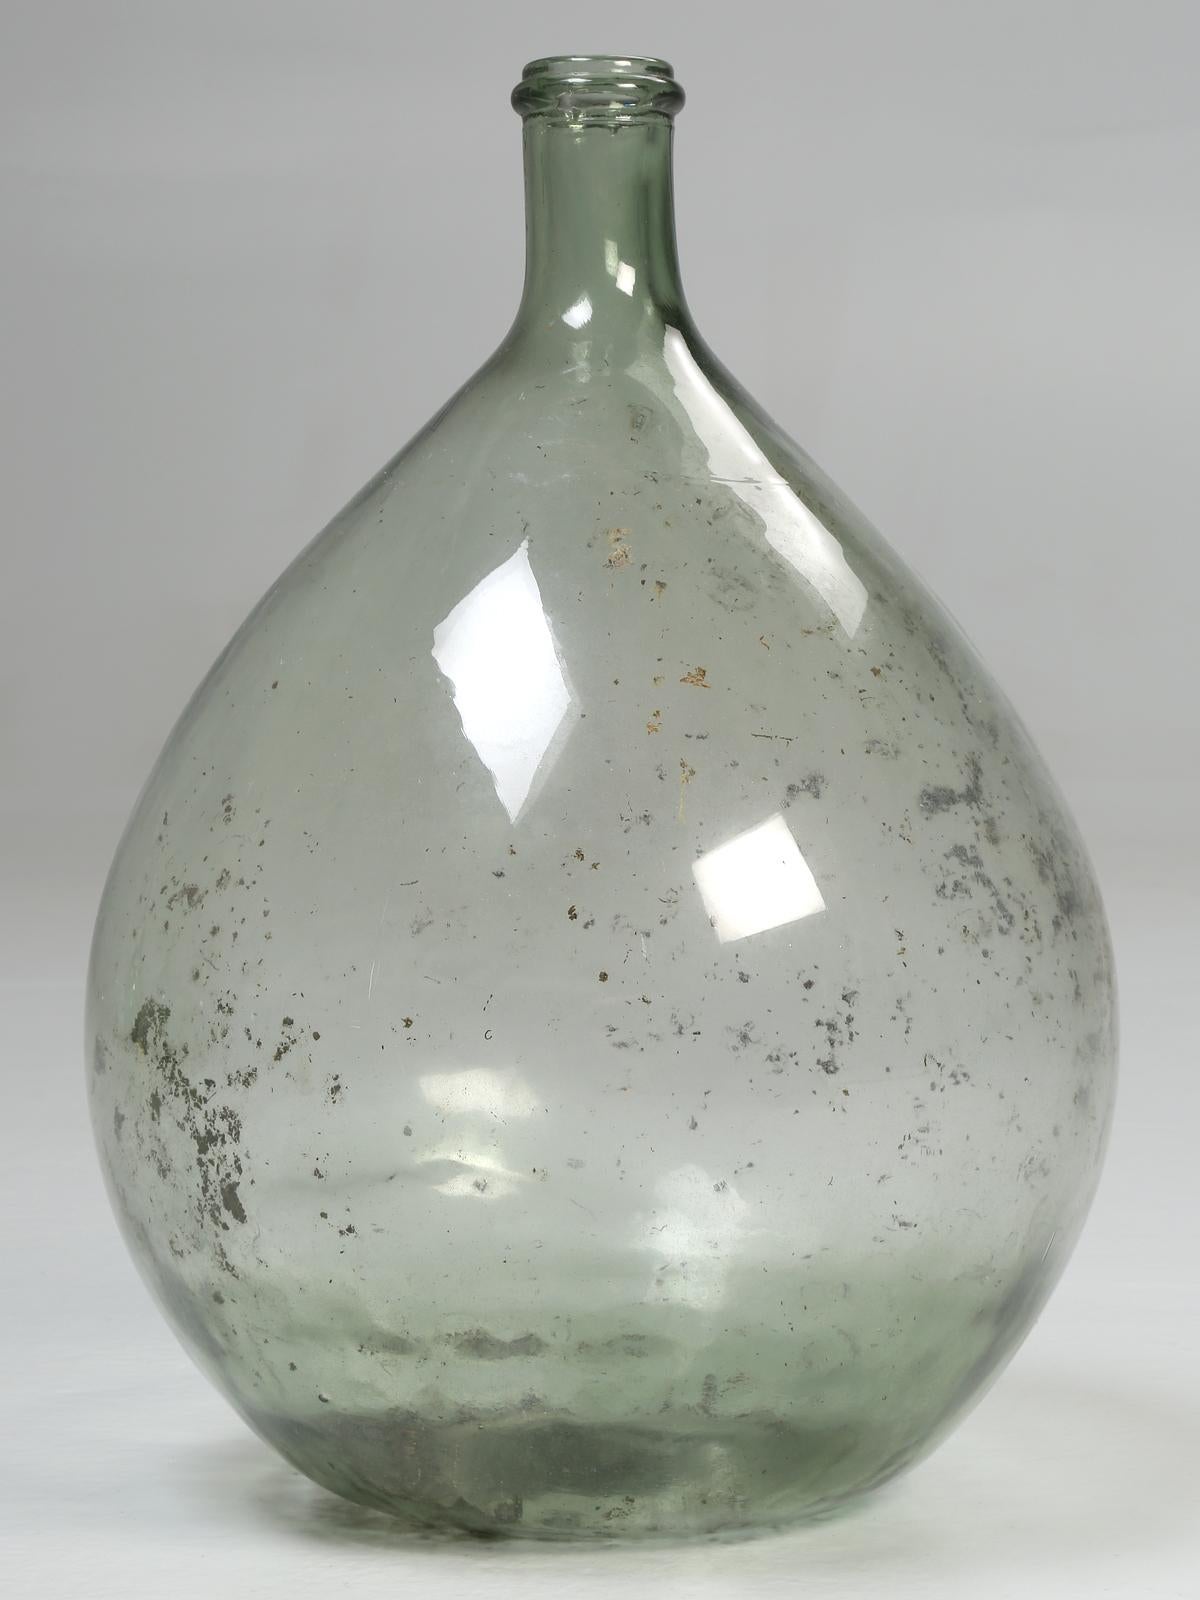 Referred to as, carboy or demijohn or jimmy john, they all are the same glass containers. Carboy originates from the Persian word; qarabah. Demijohn comes from the French; dame-Jeanne, or Lady Jane and derives from the 17th century and refers to any